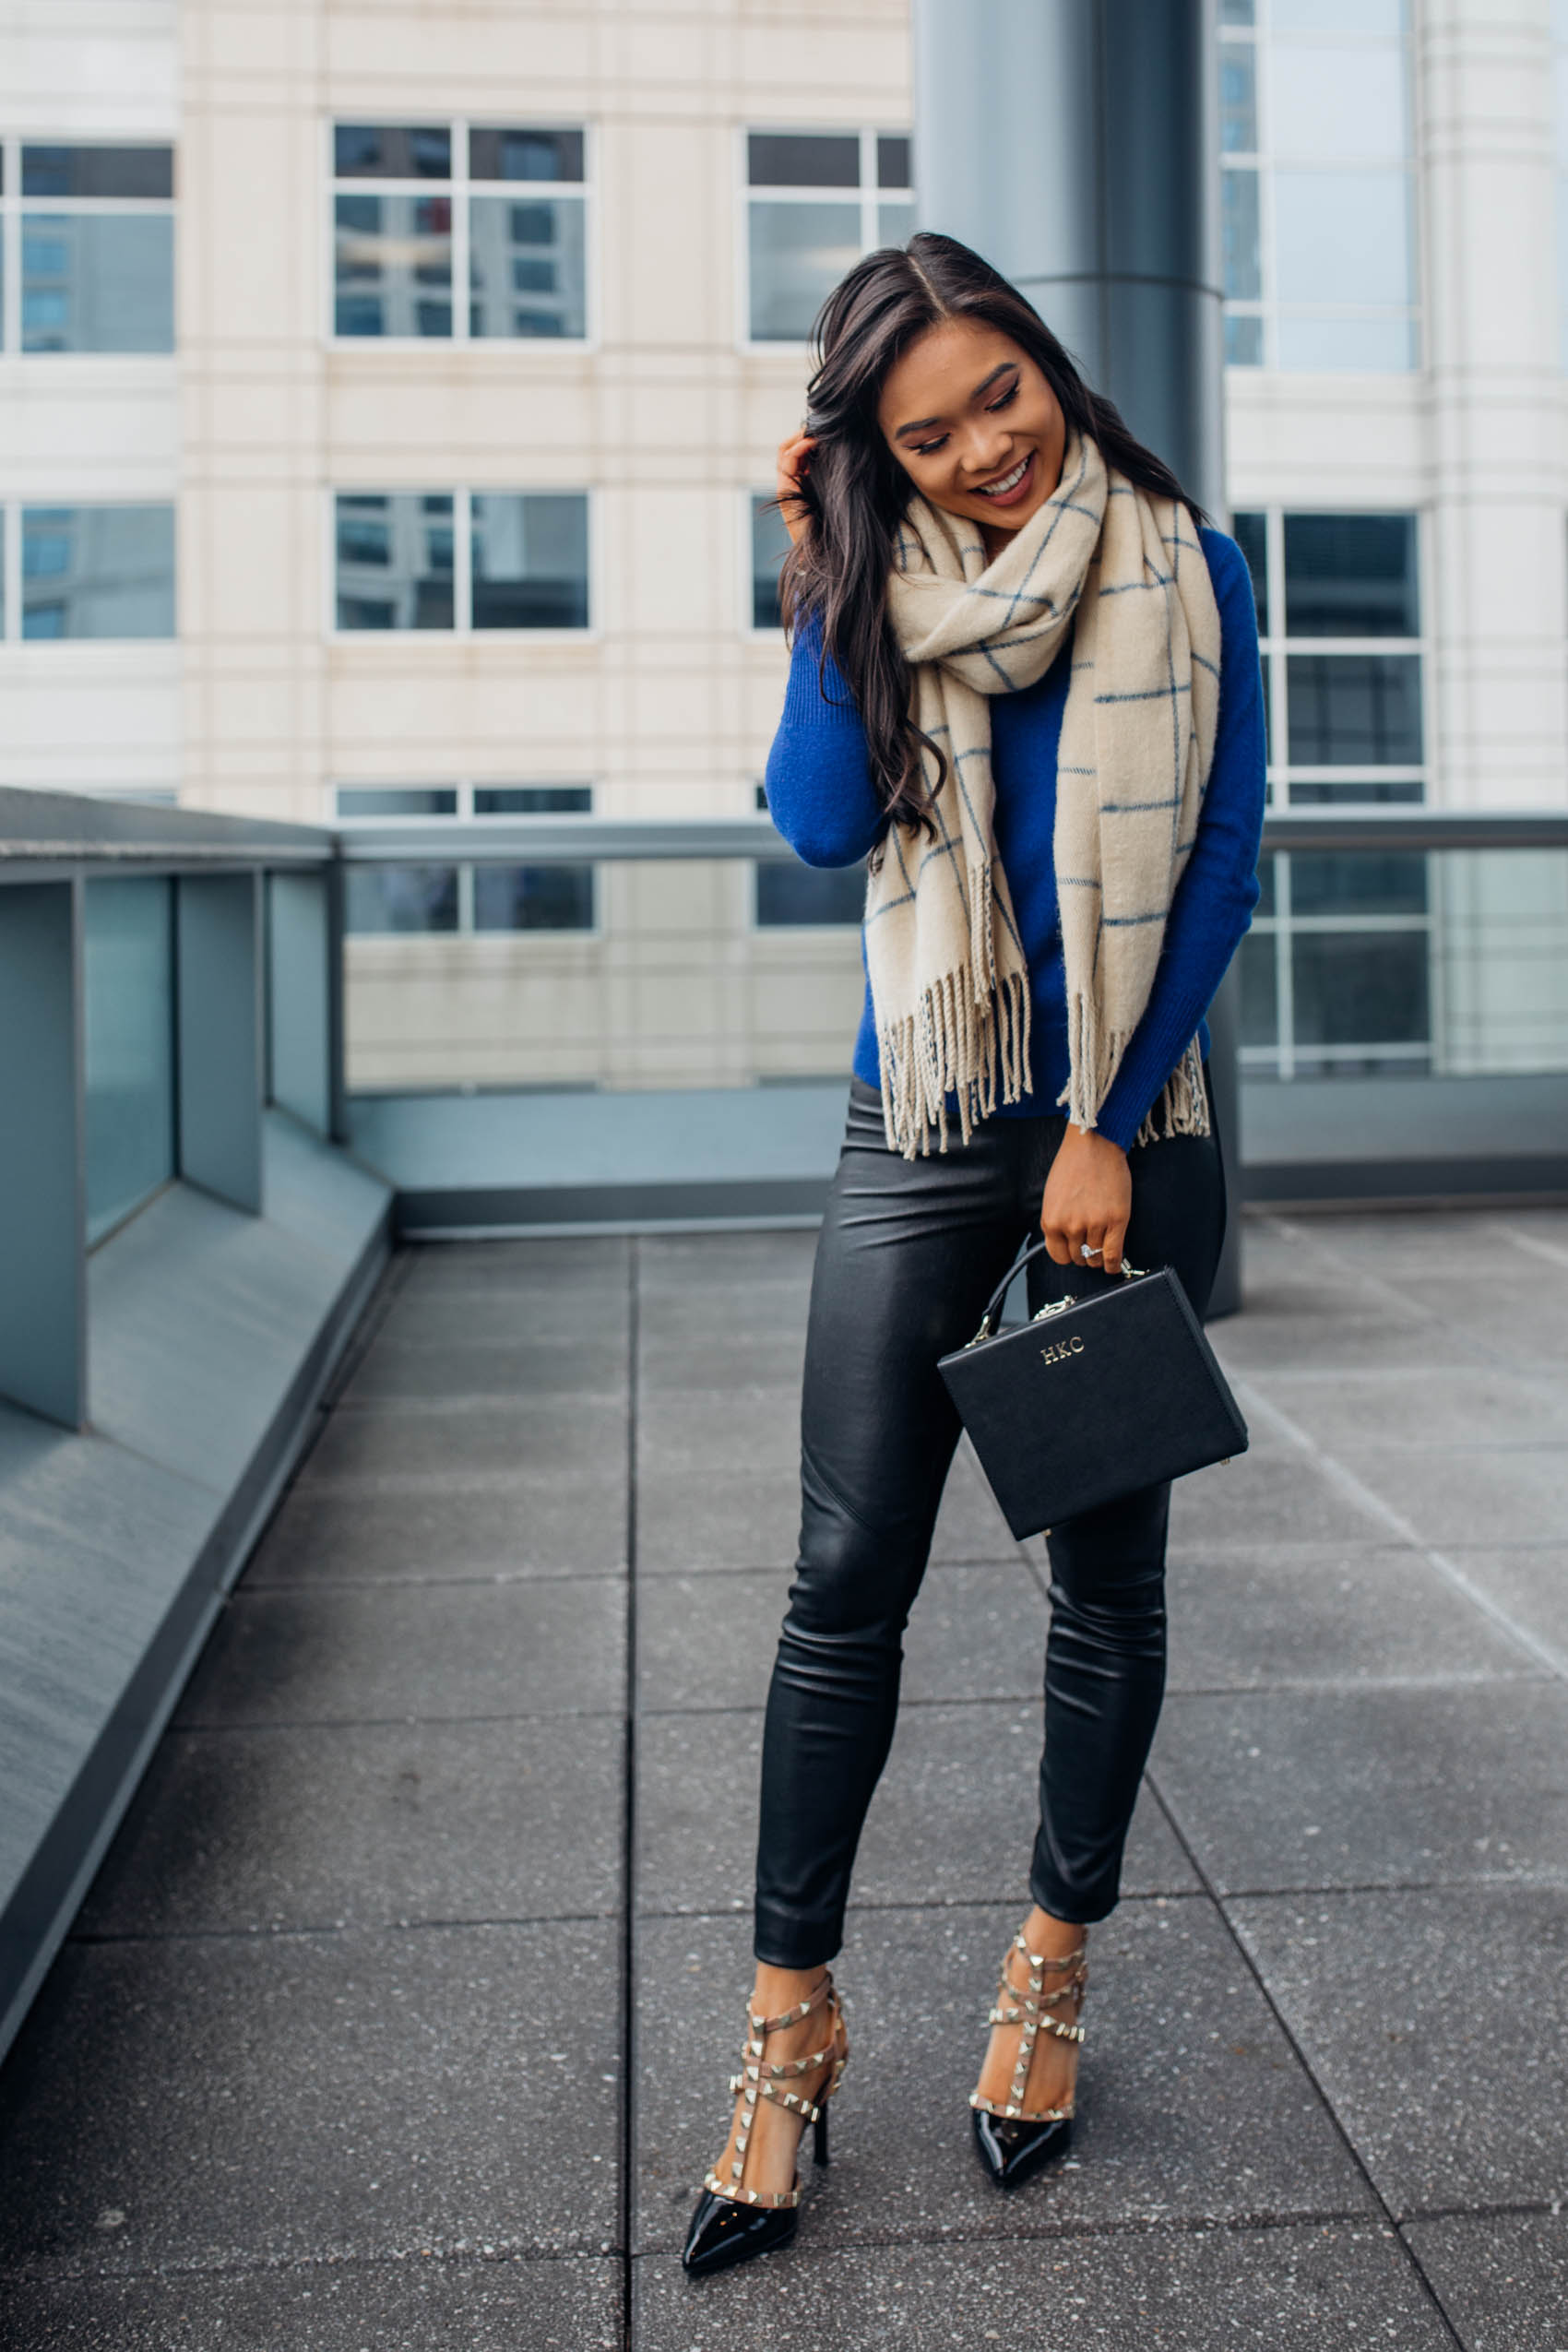 How to dress up a winter outfit with heels